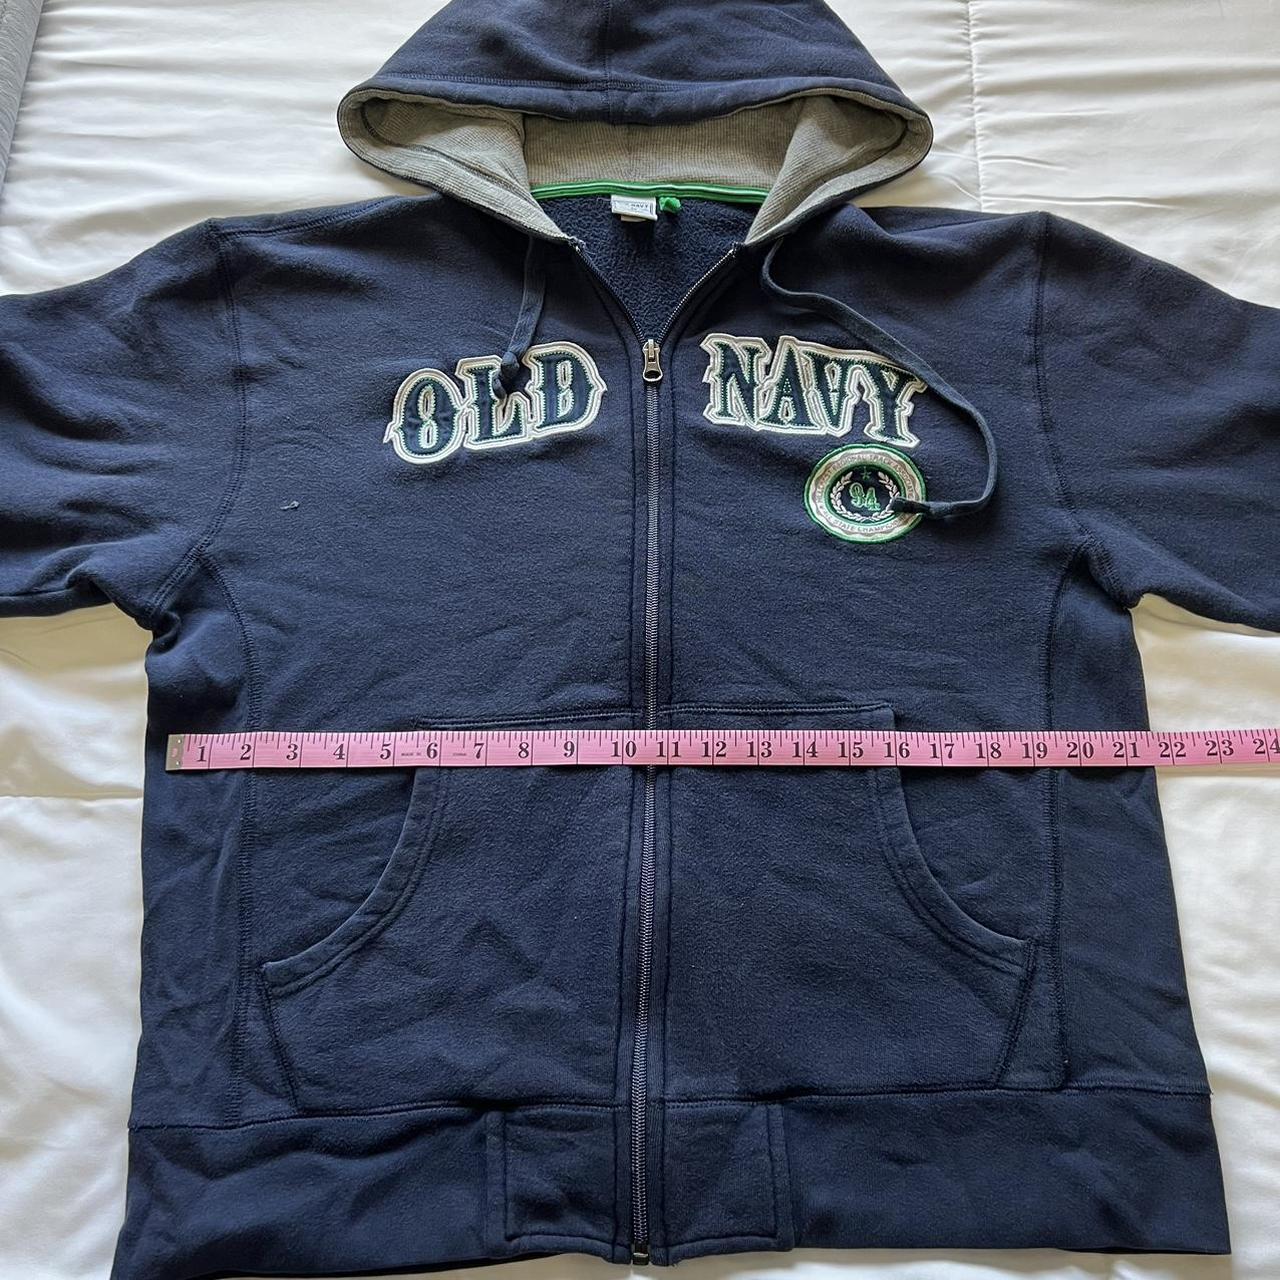 Old Navy Men's Navy and Blue Jacket